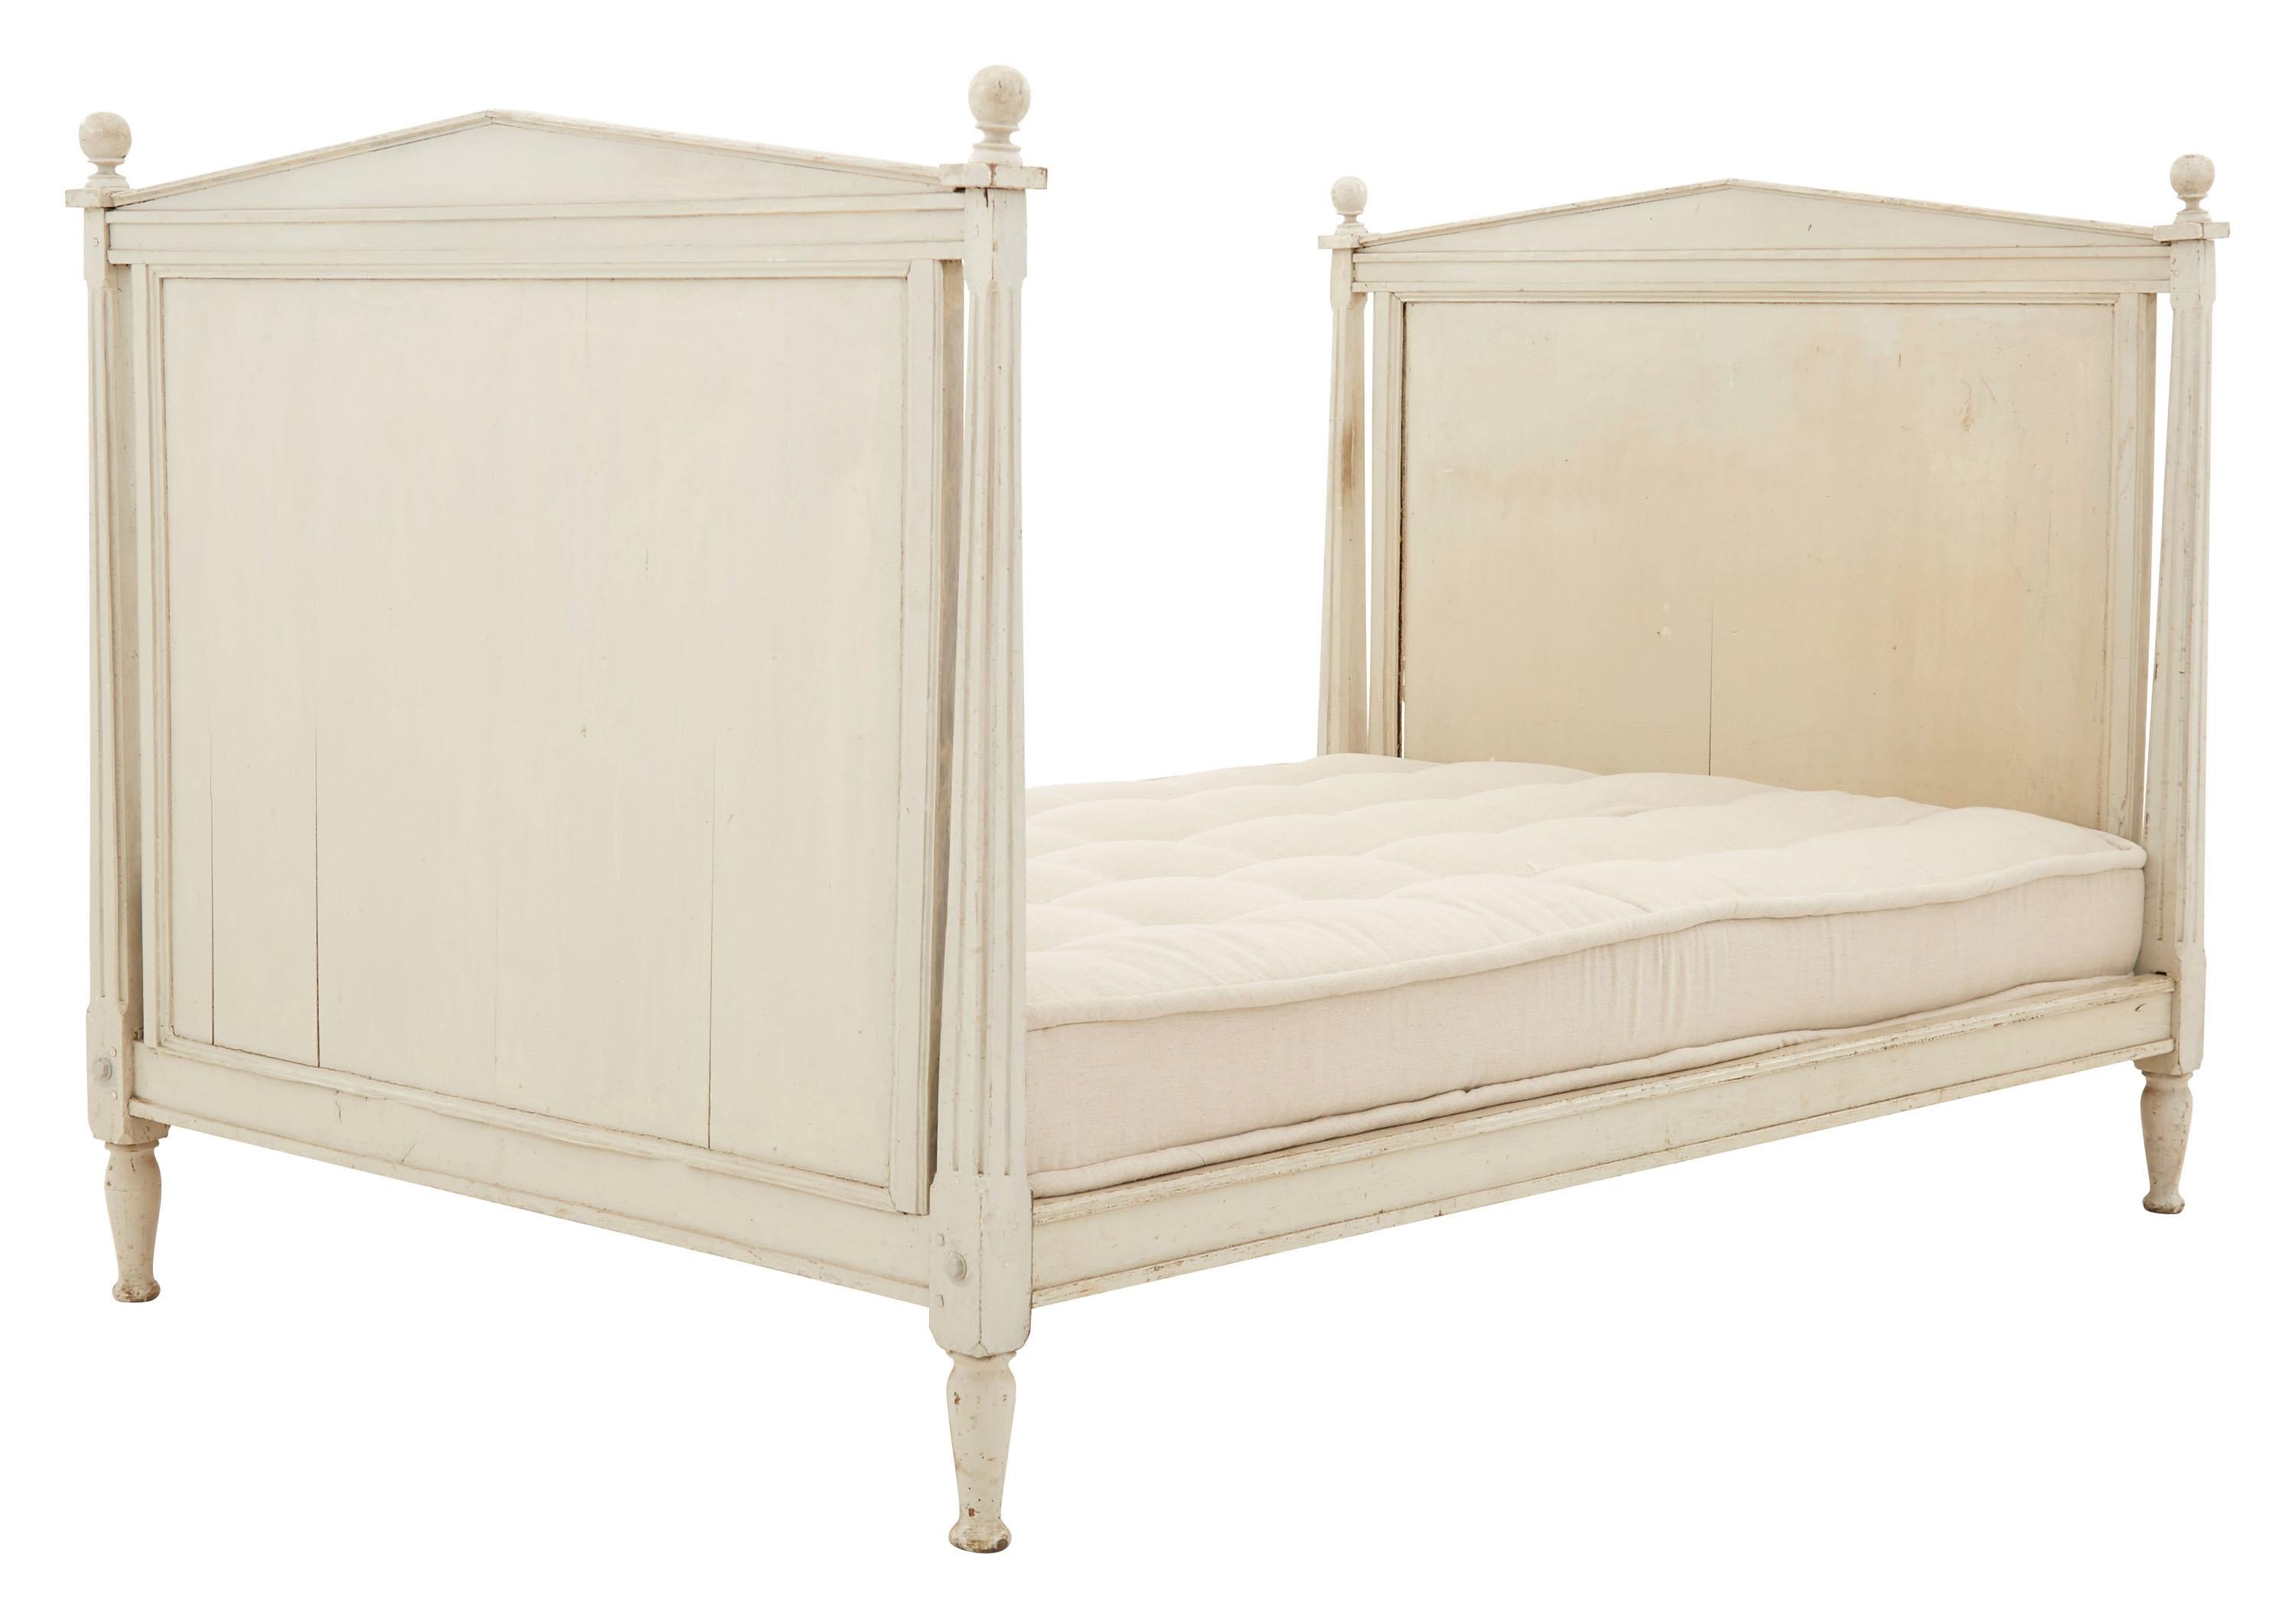 • Wood frame
• Hand painted grey finish
• Natural linen mattress
• 20th century
• France

Dimensions
•50.5